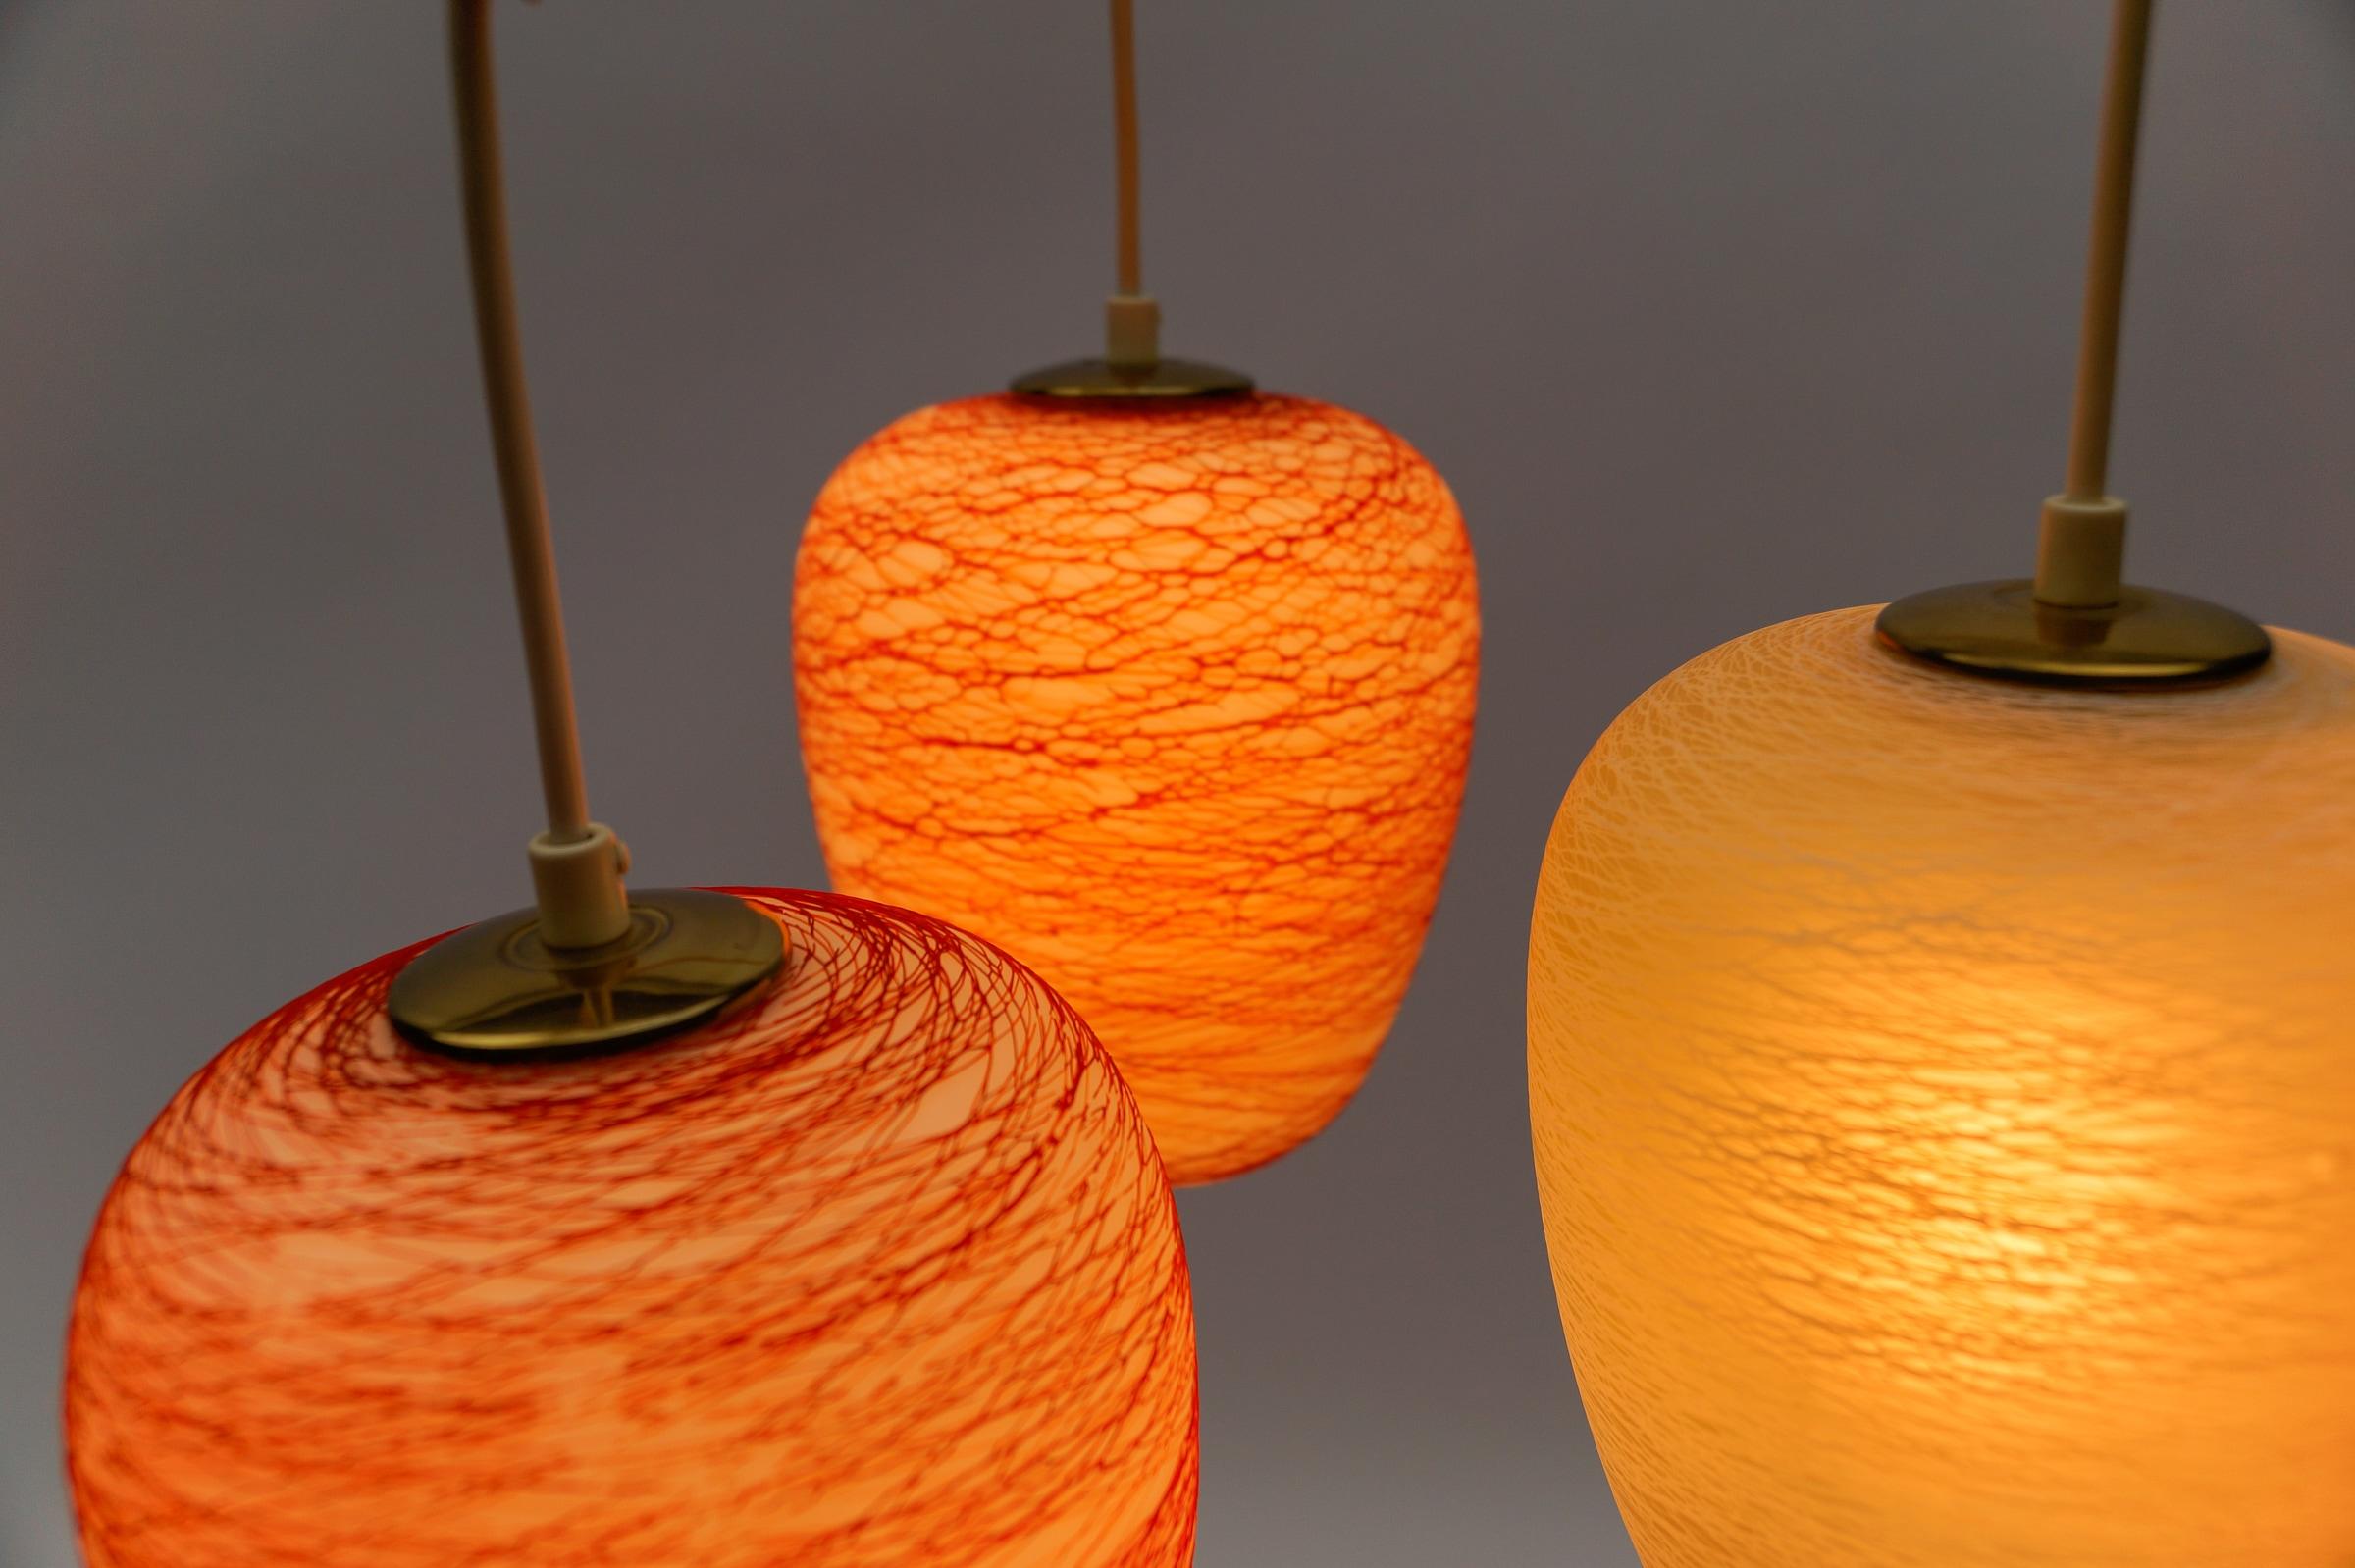 Mid-Century Modern Pendant Lamp made in Glass and Metal, 1950s For Sale 5